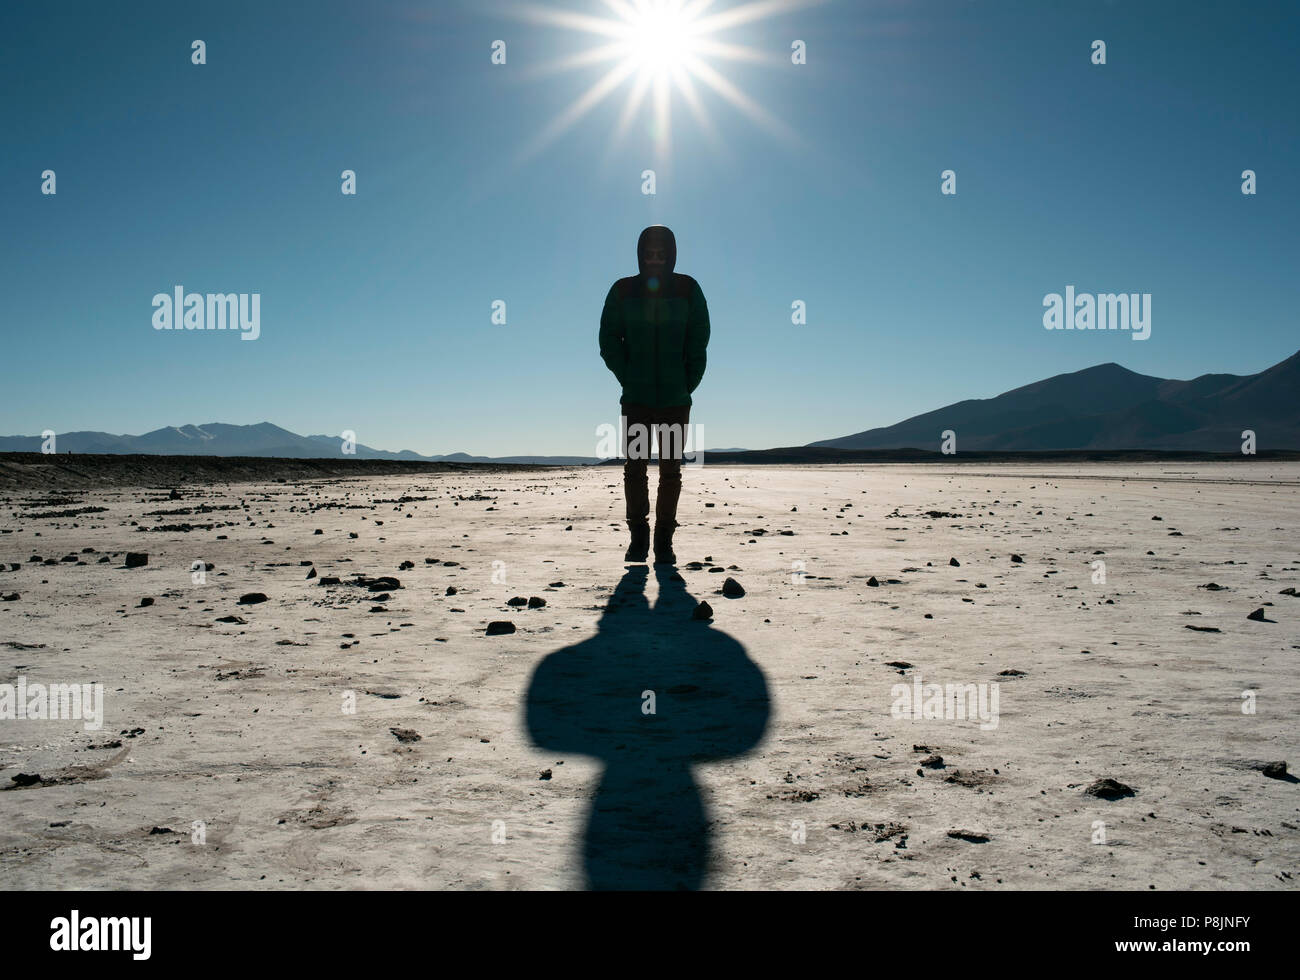 Silhouette of a man walking on the deserted, surreal landscape of Salar de Chiguana, Bolivia, South America Stock Photo